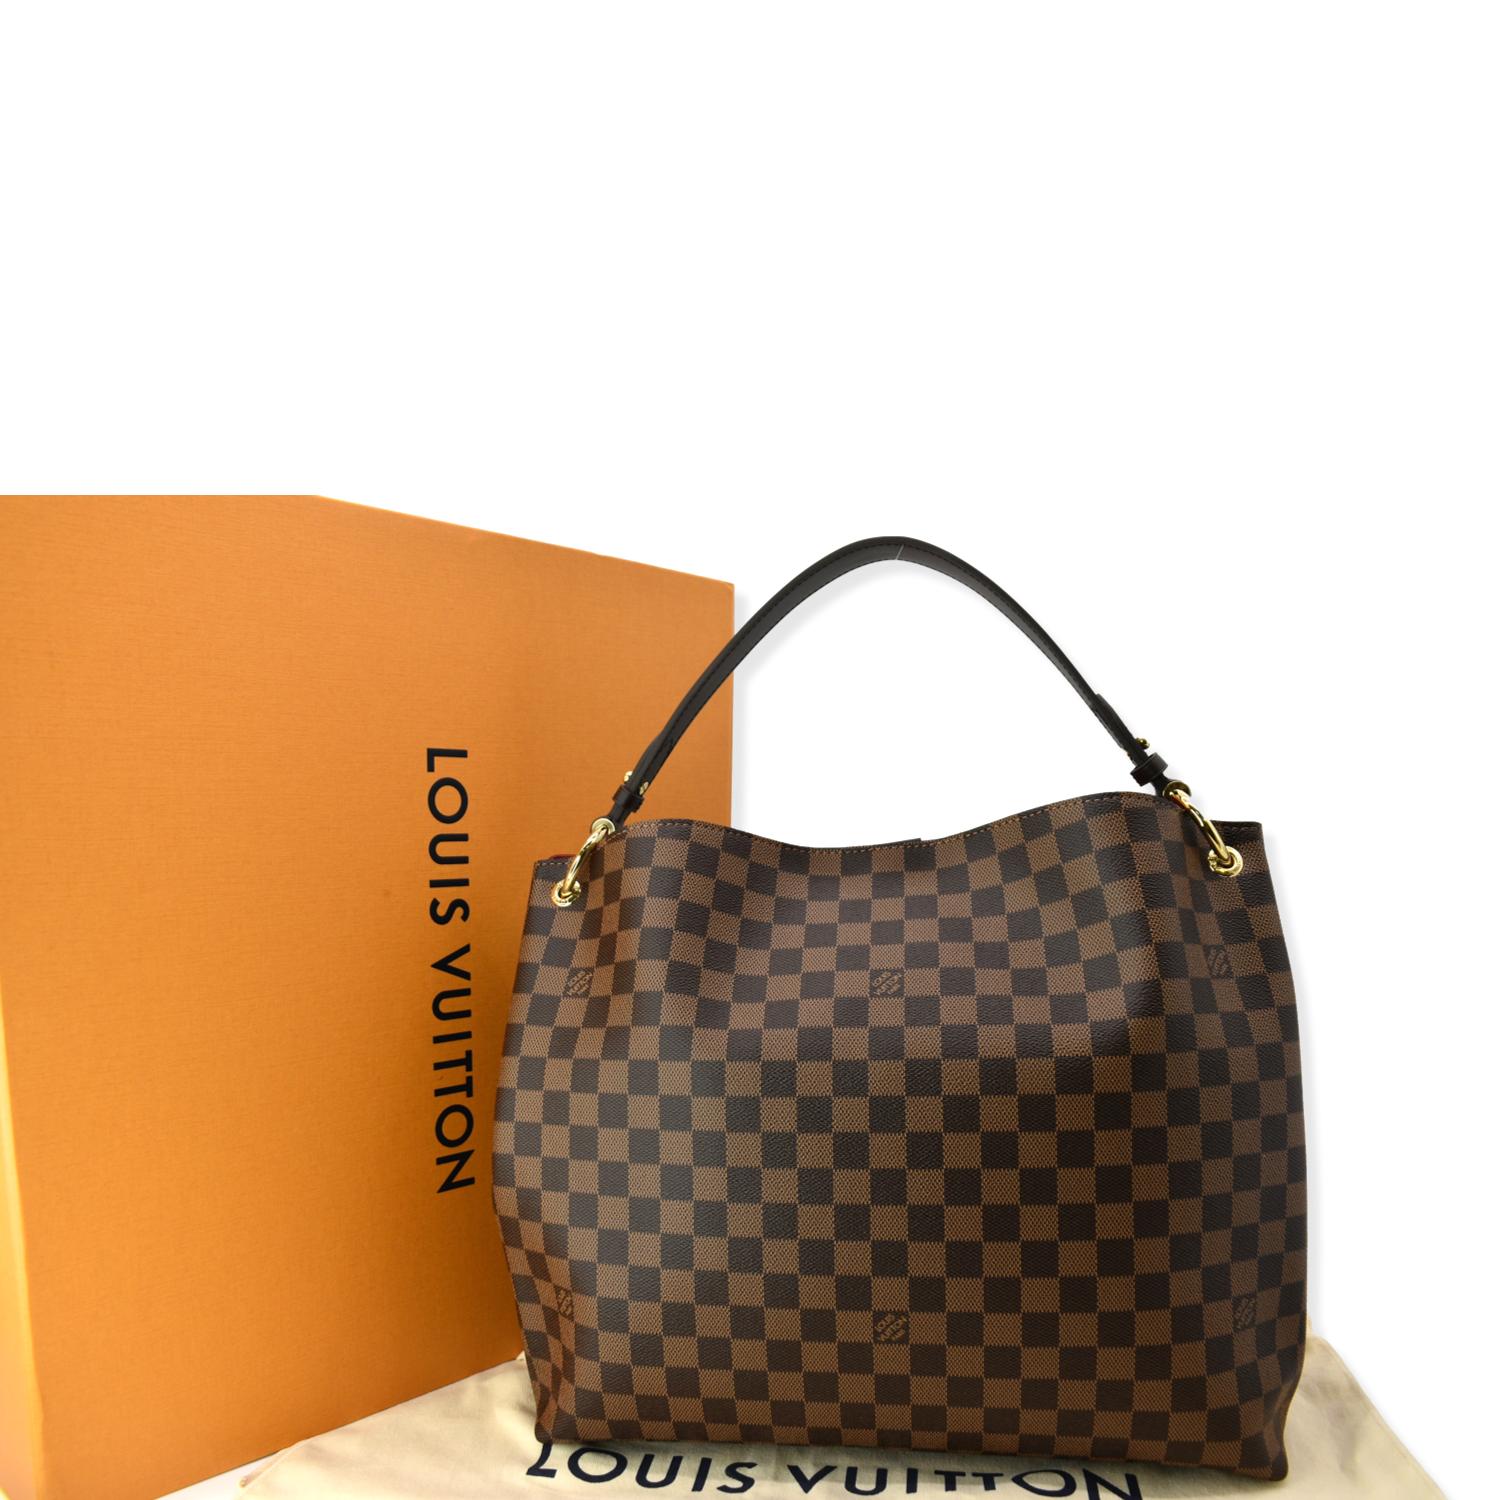 louis vuittons handbags brown leather